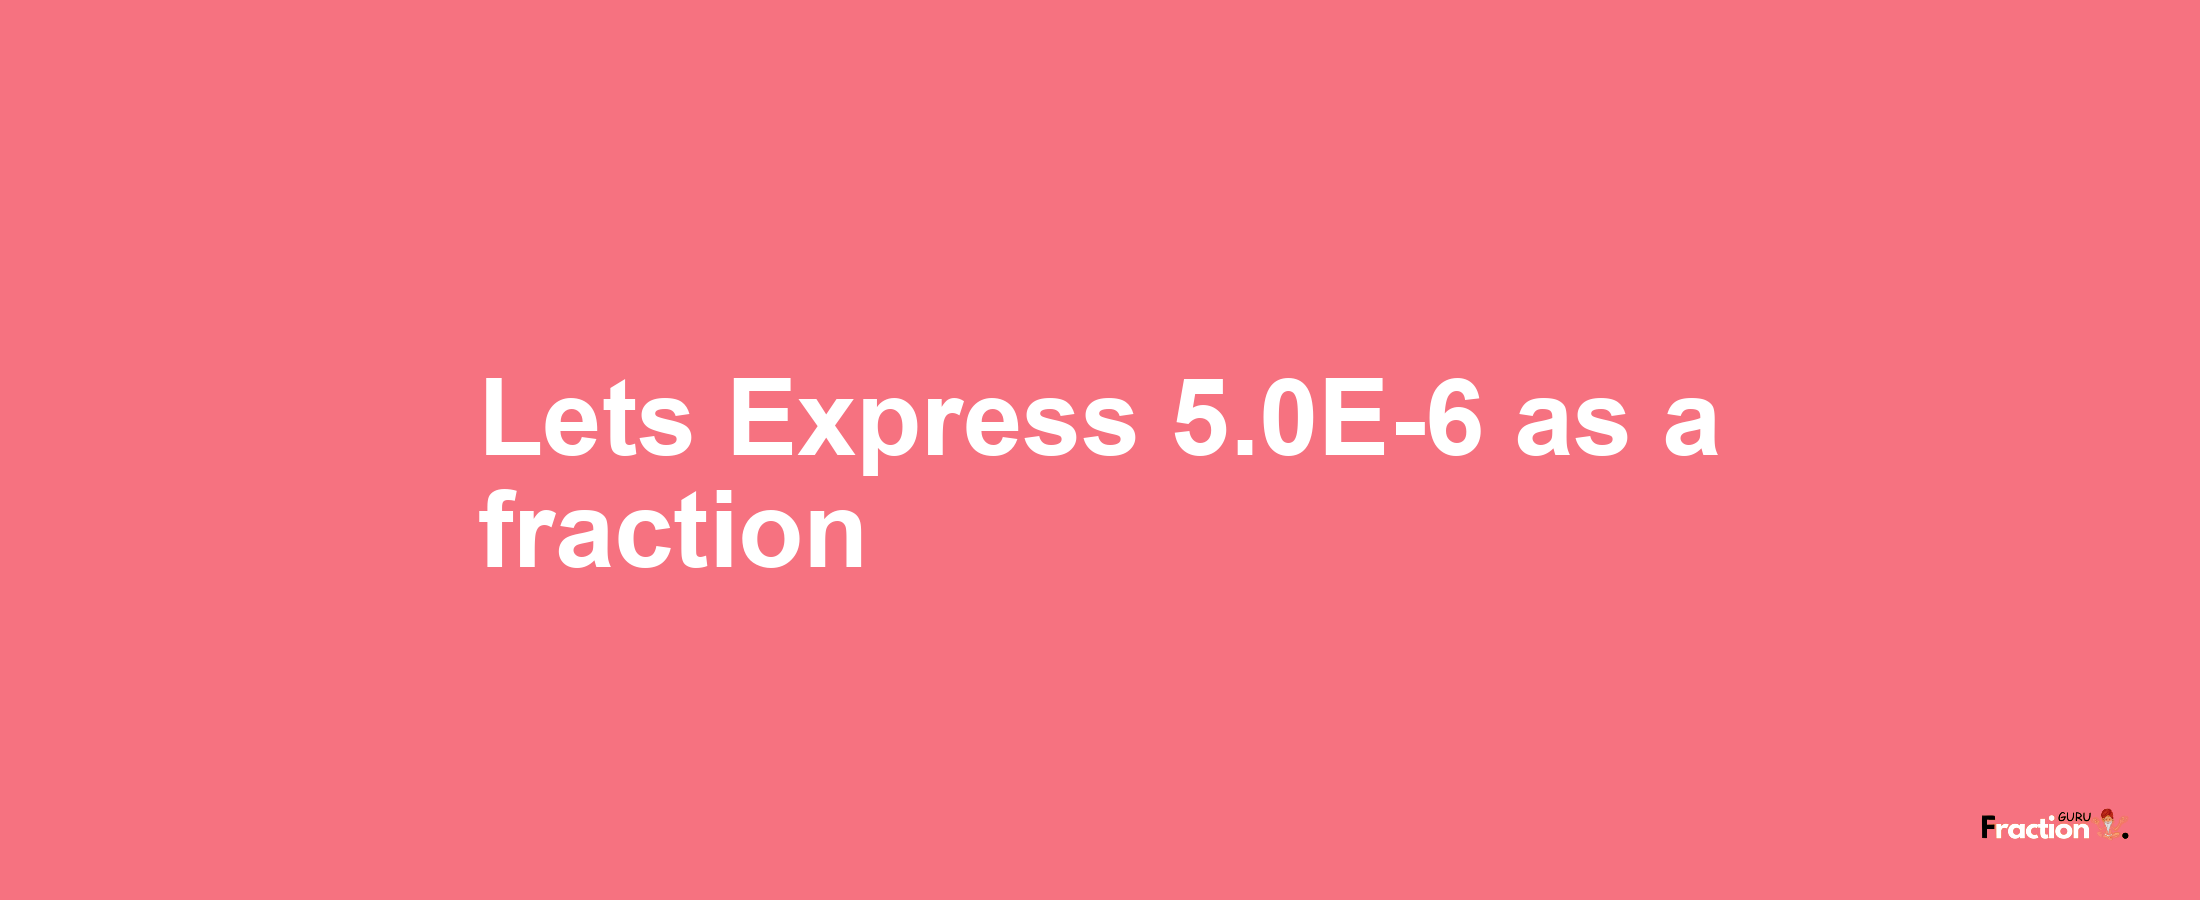 Lets Express 5.0E-6 as afraction